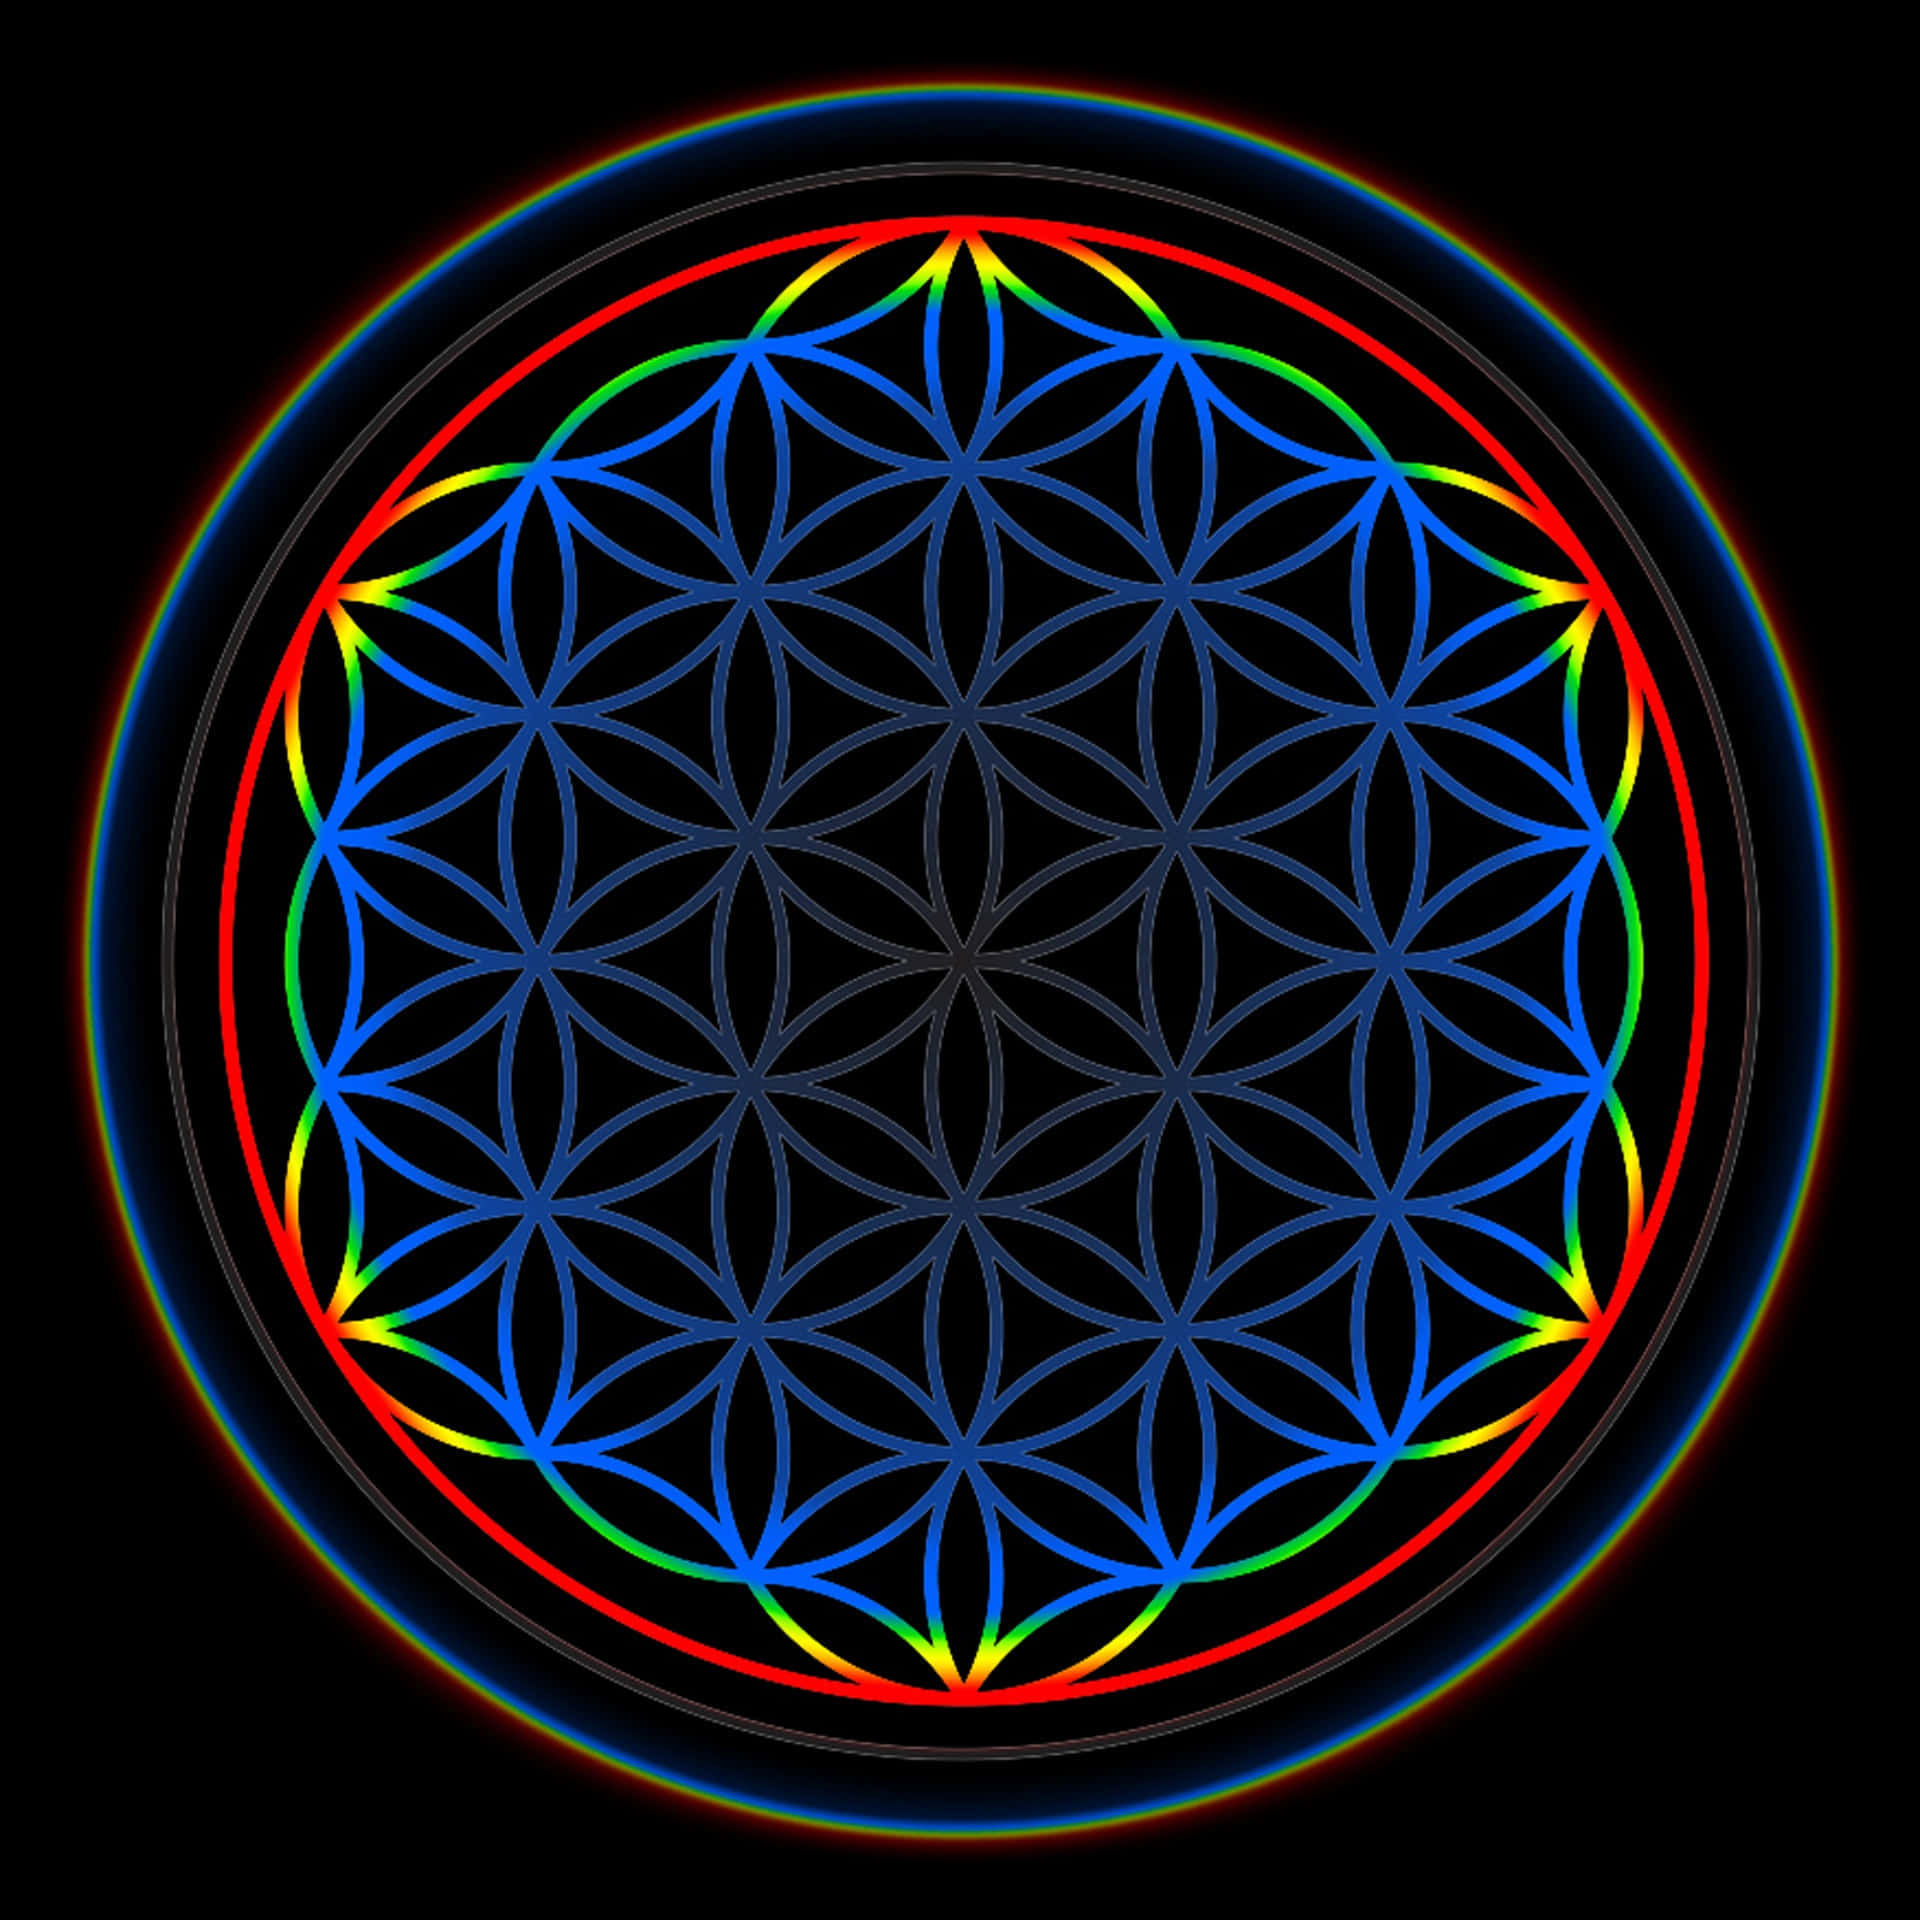 Download A Flower Of Life In A Circle With Colorful Lights Wallpaper ...